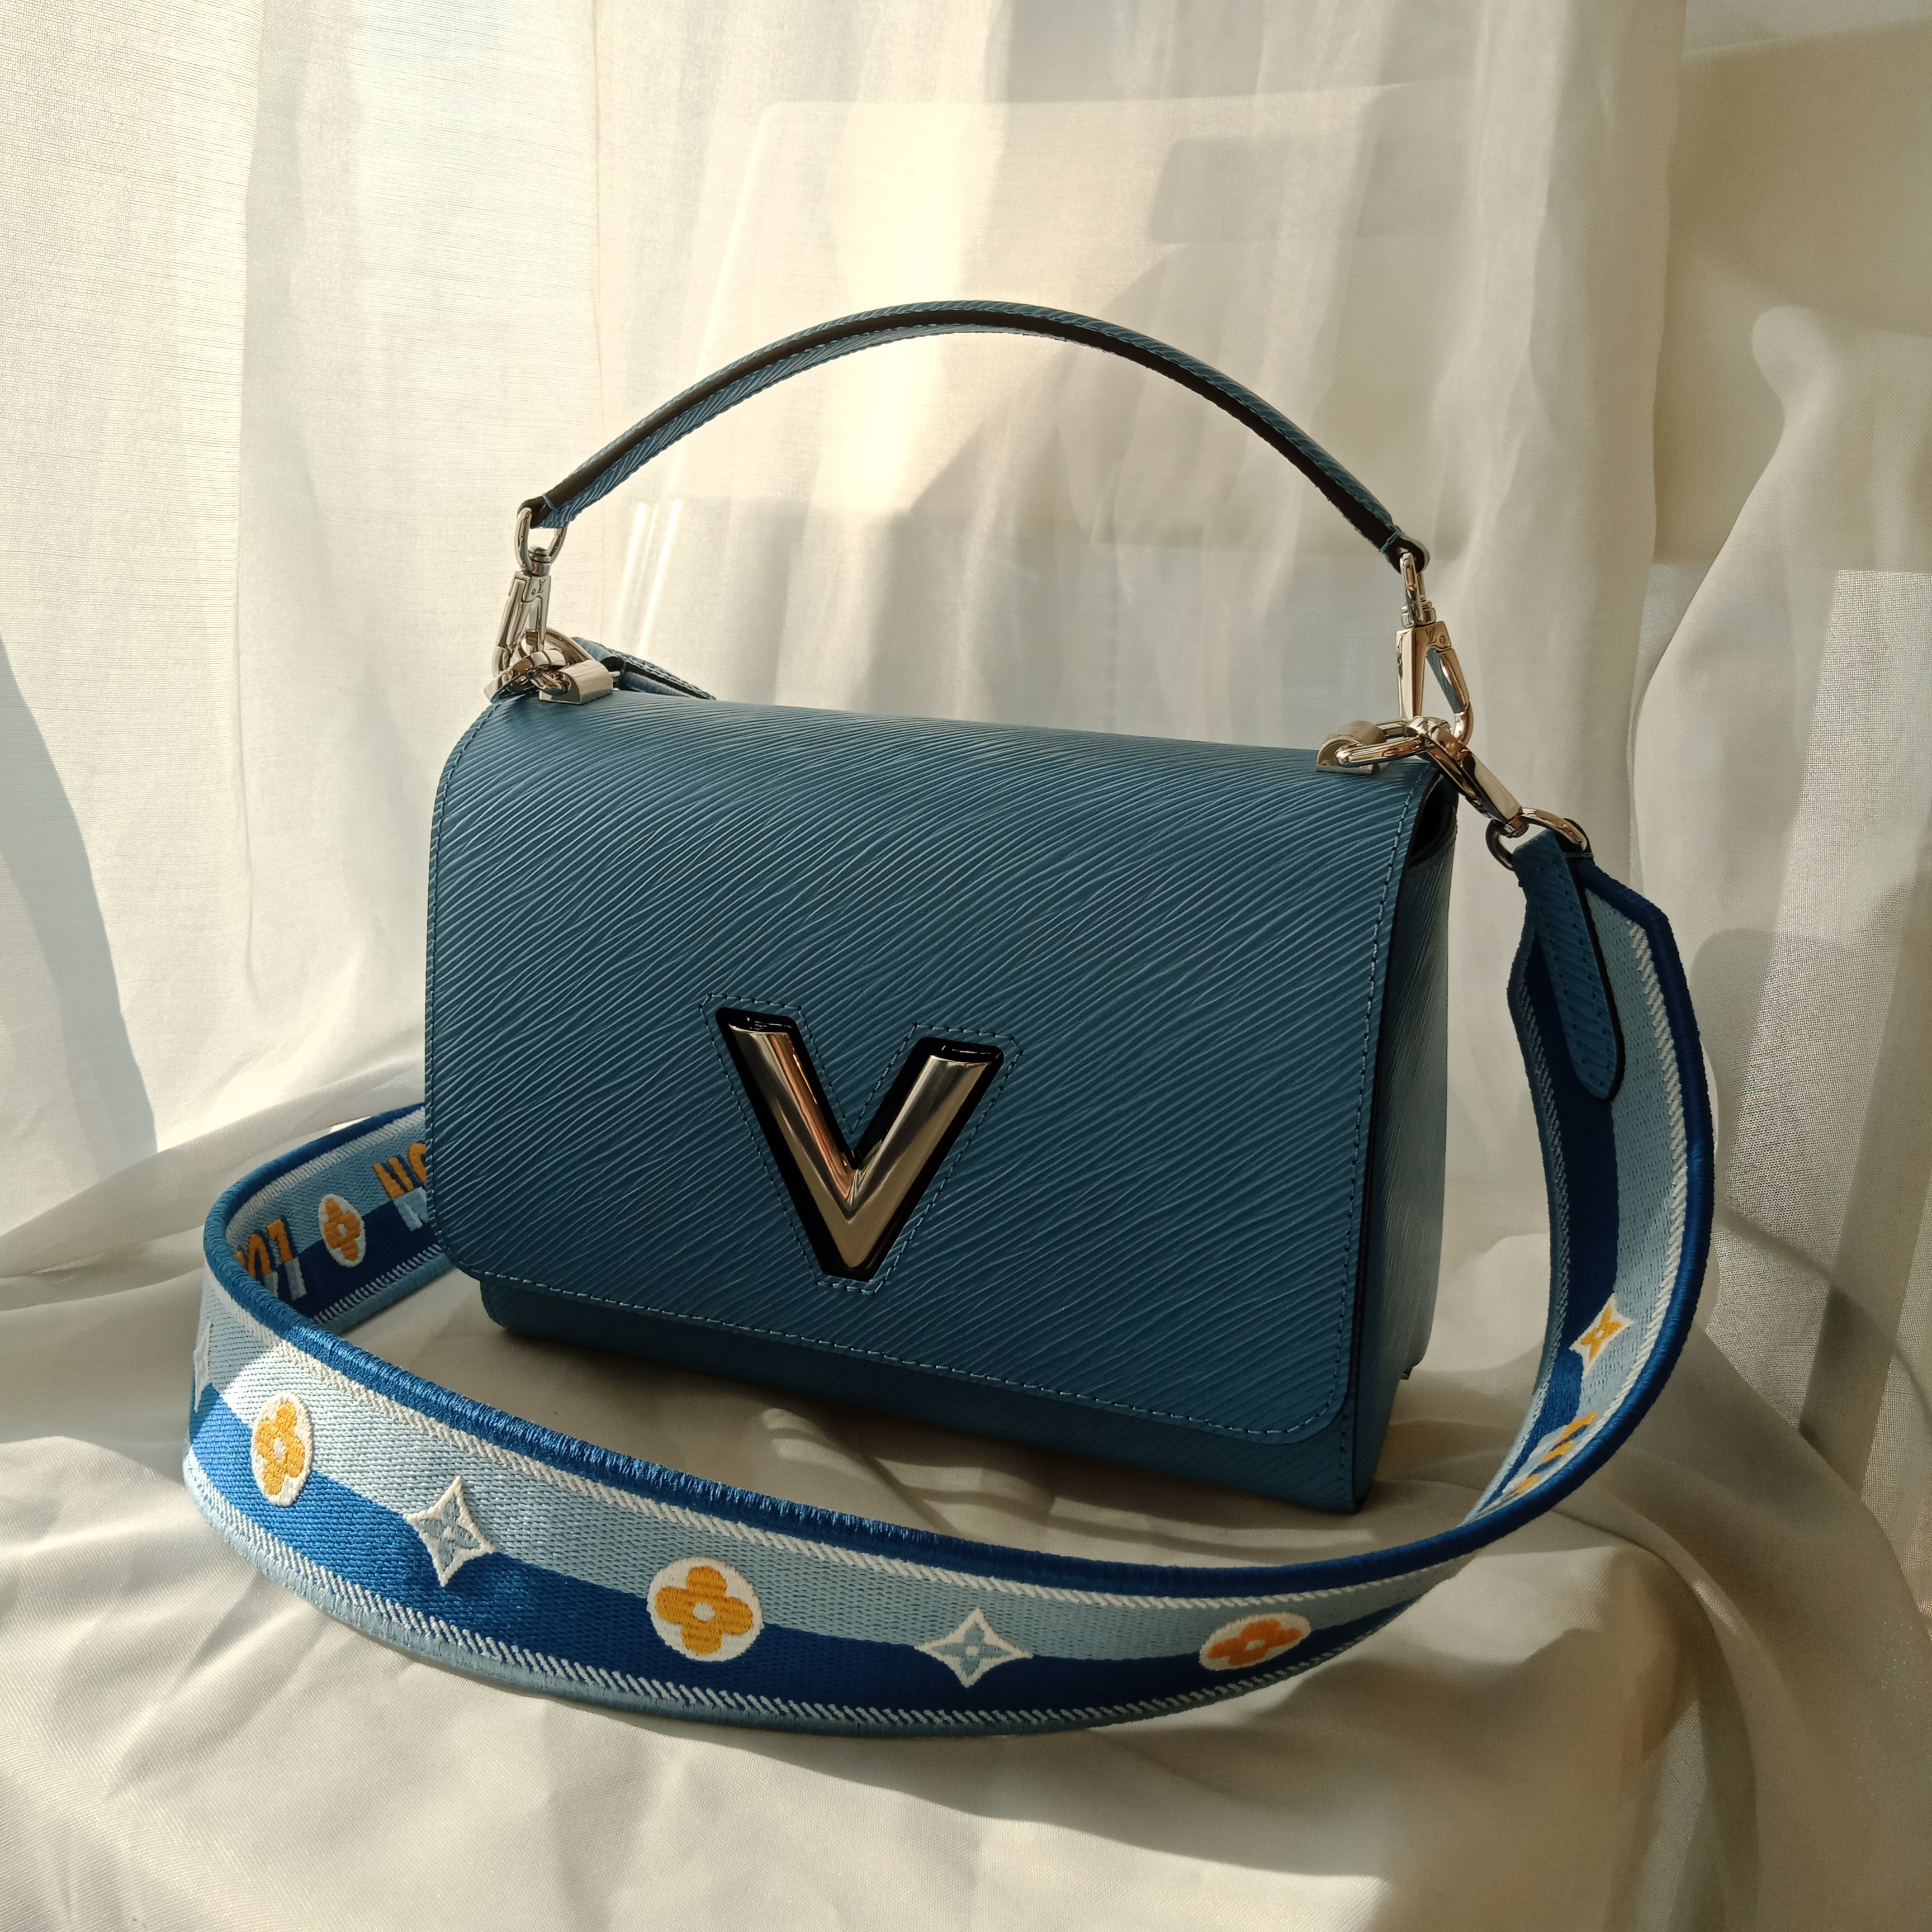 Louis Vuitton Offers A Fresh Take On Their Iconic Twist Bag For